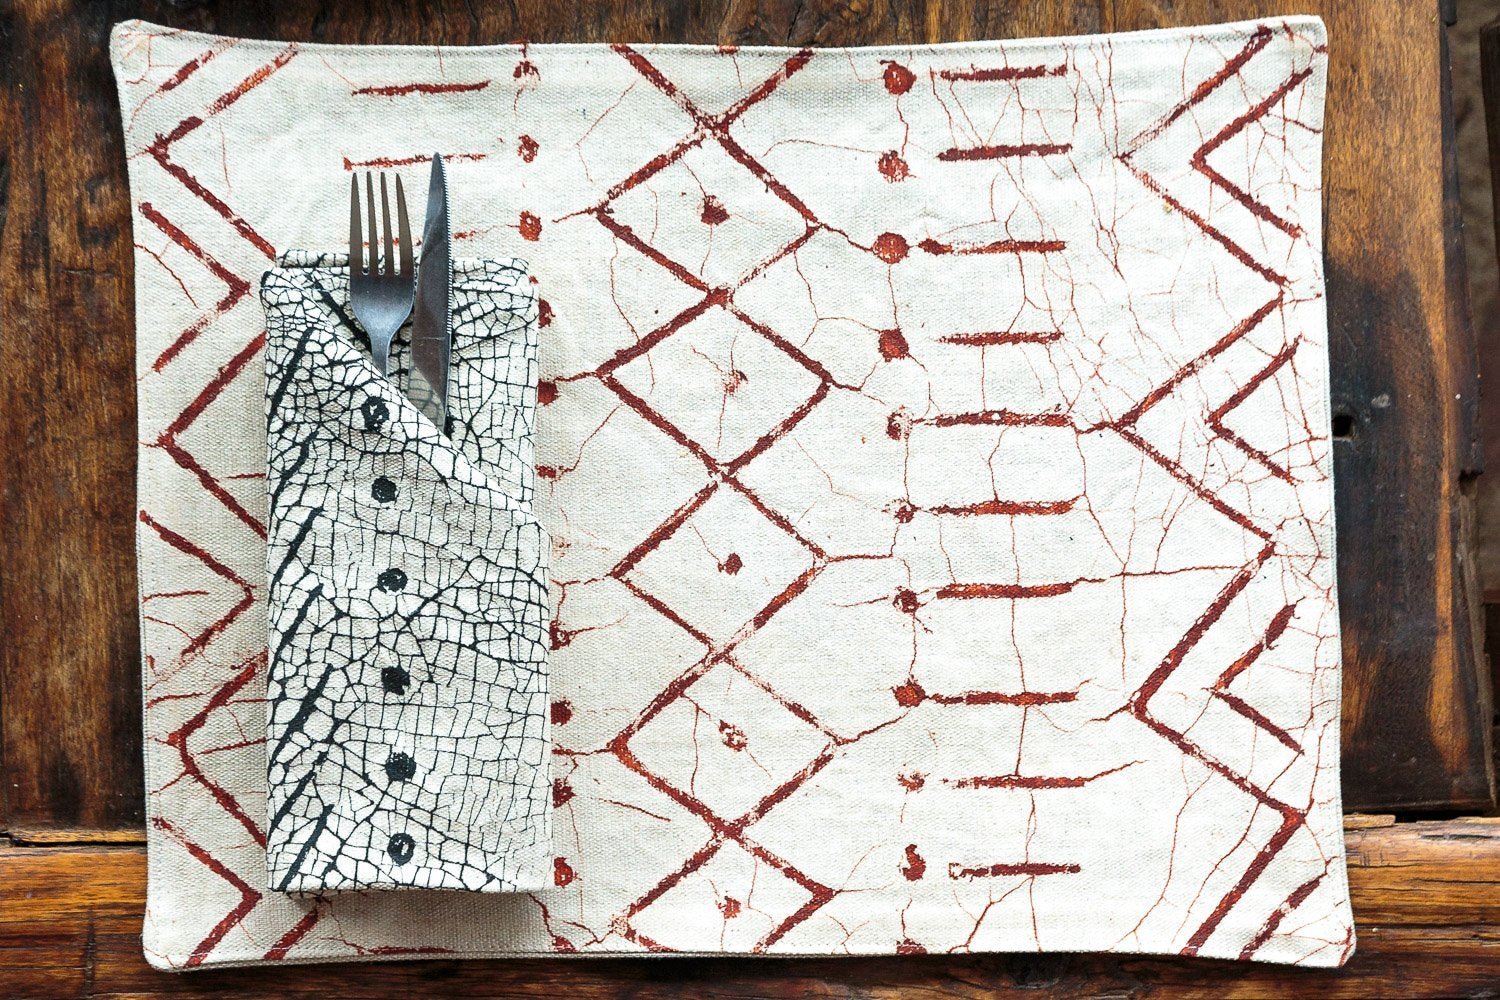 African made white napkins adorned with black geometric pattens to add a touch of fun to minimalist kitchens.